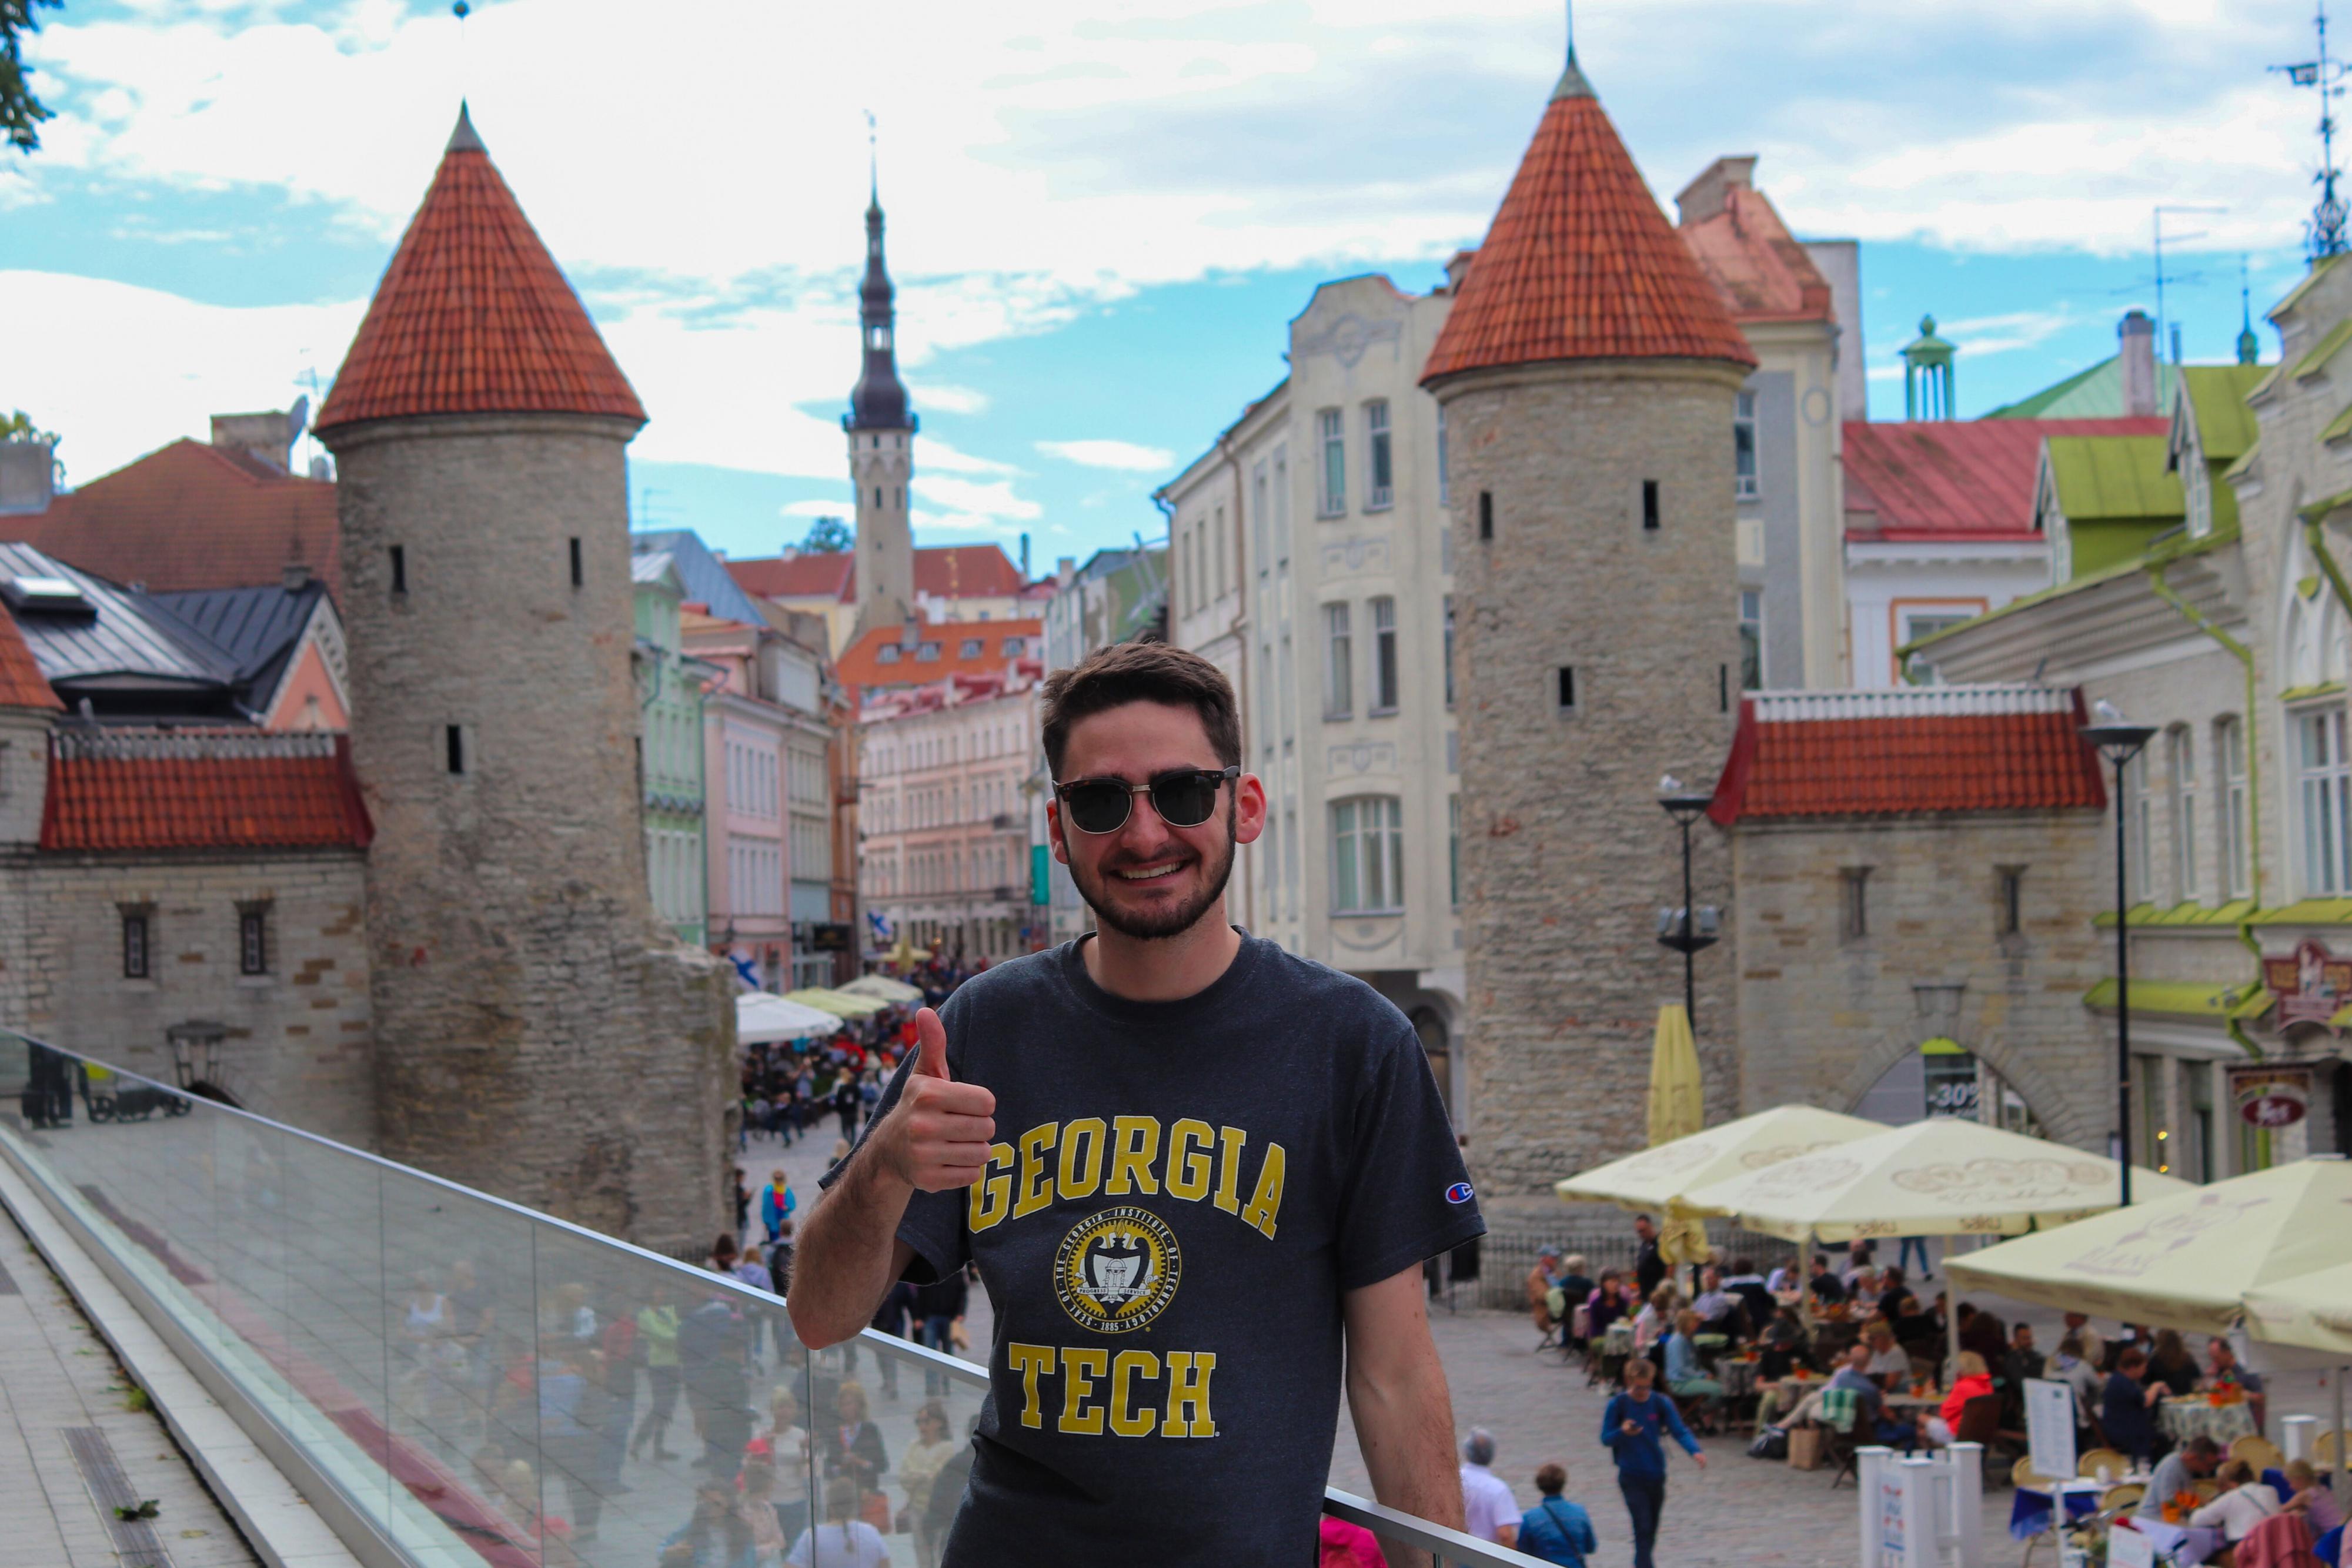 Student wearing a Georgia Tech tshirt giving a thumbs up while standing on a balcony overlooking a city in Latvia